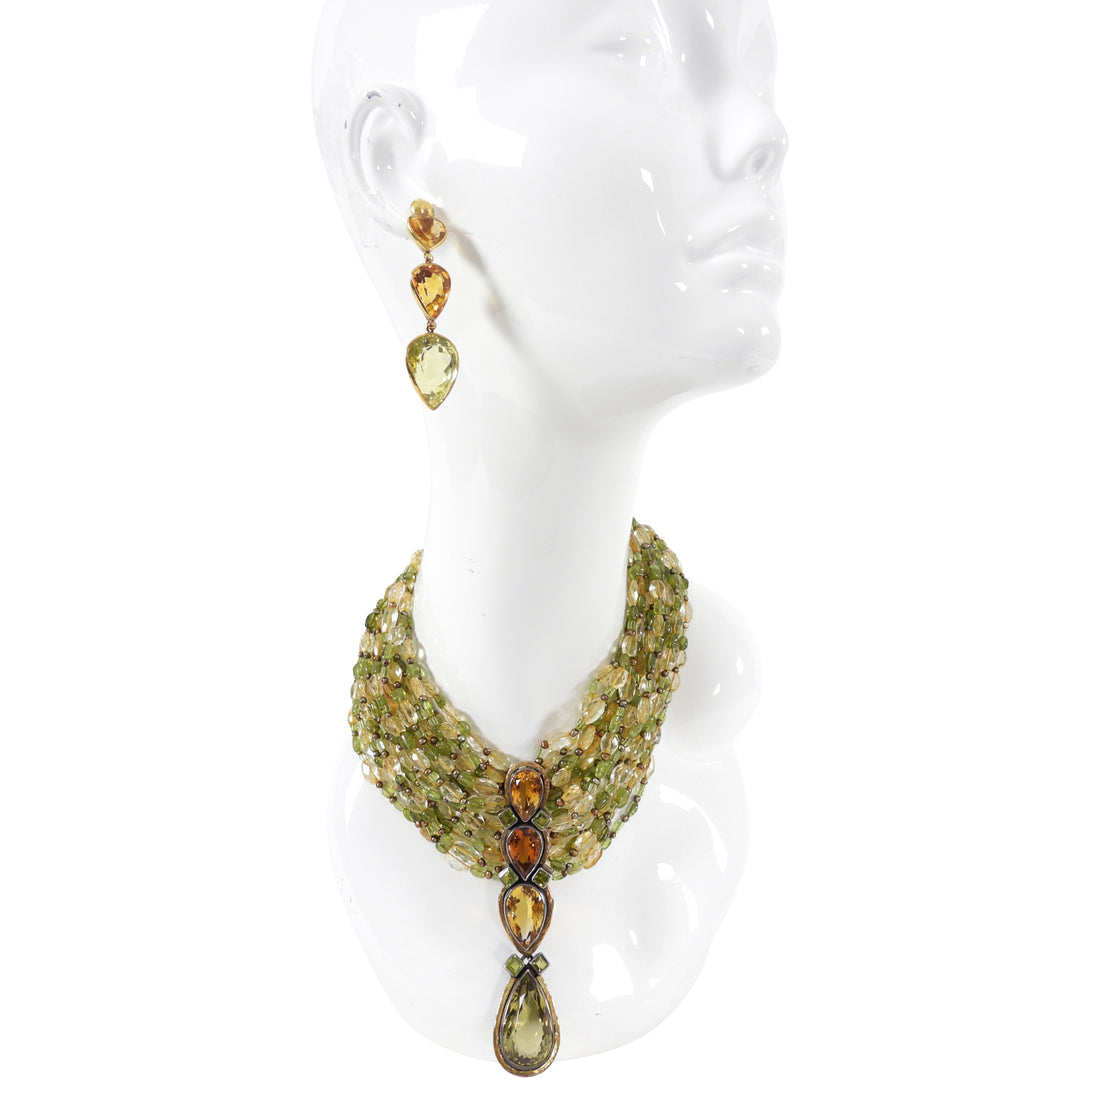 Eileen Coyne 22k Gold Tourmaline and Citrine Necklace and Earrings